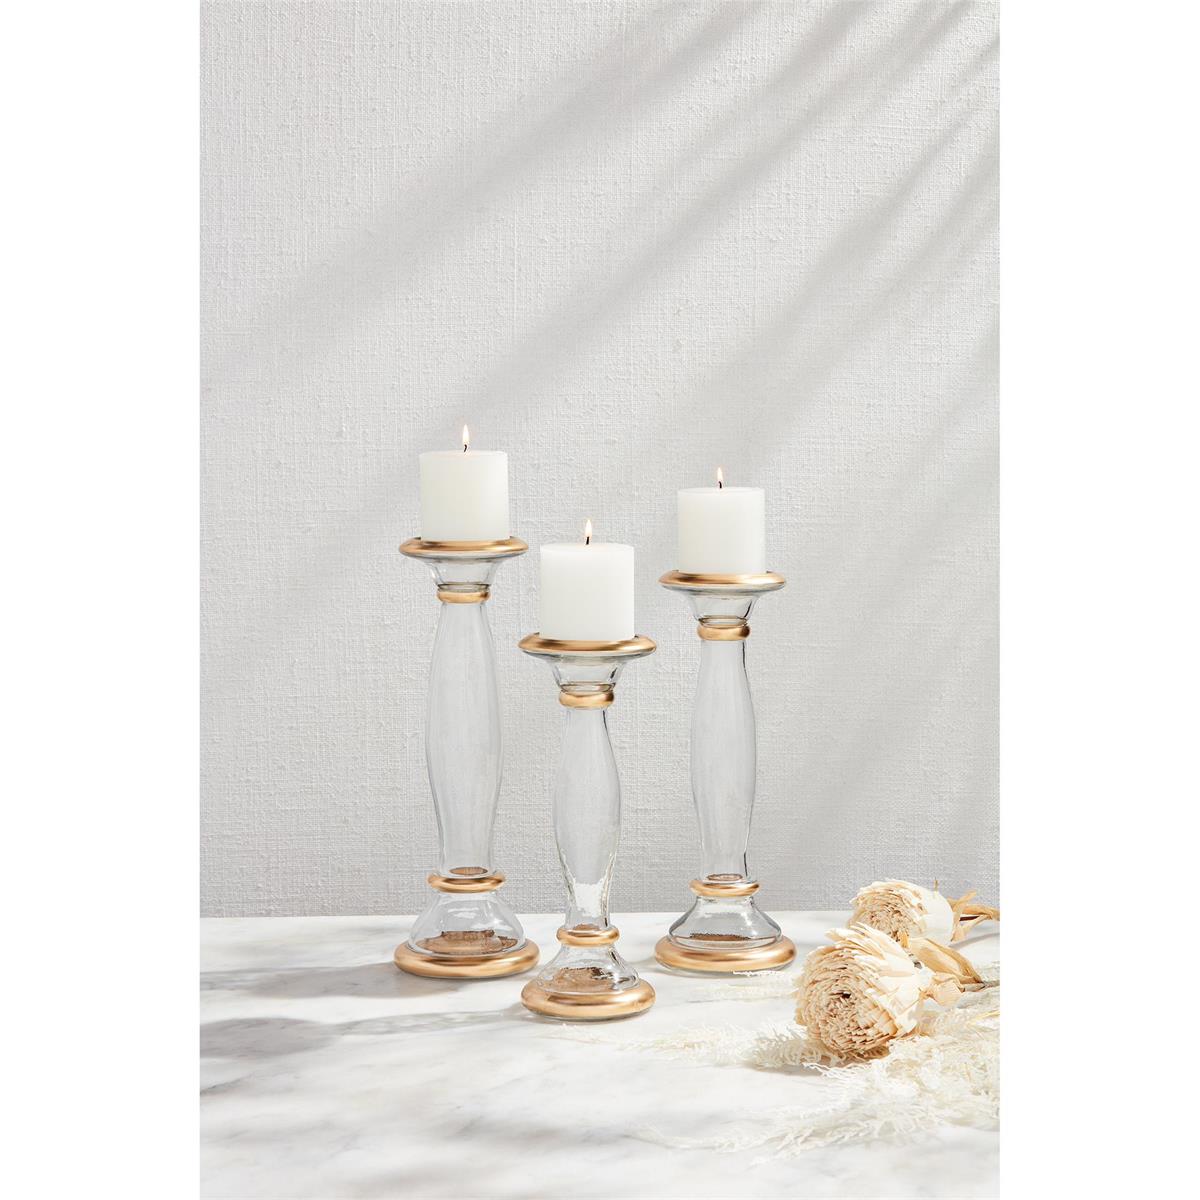 3 sizes of glass and gold candlesticks with lit candles on them set on a table with dried flowers.